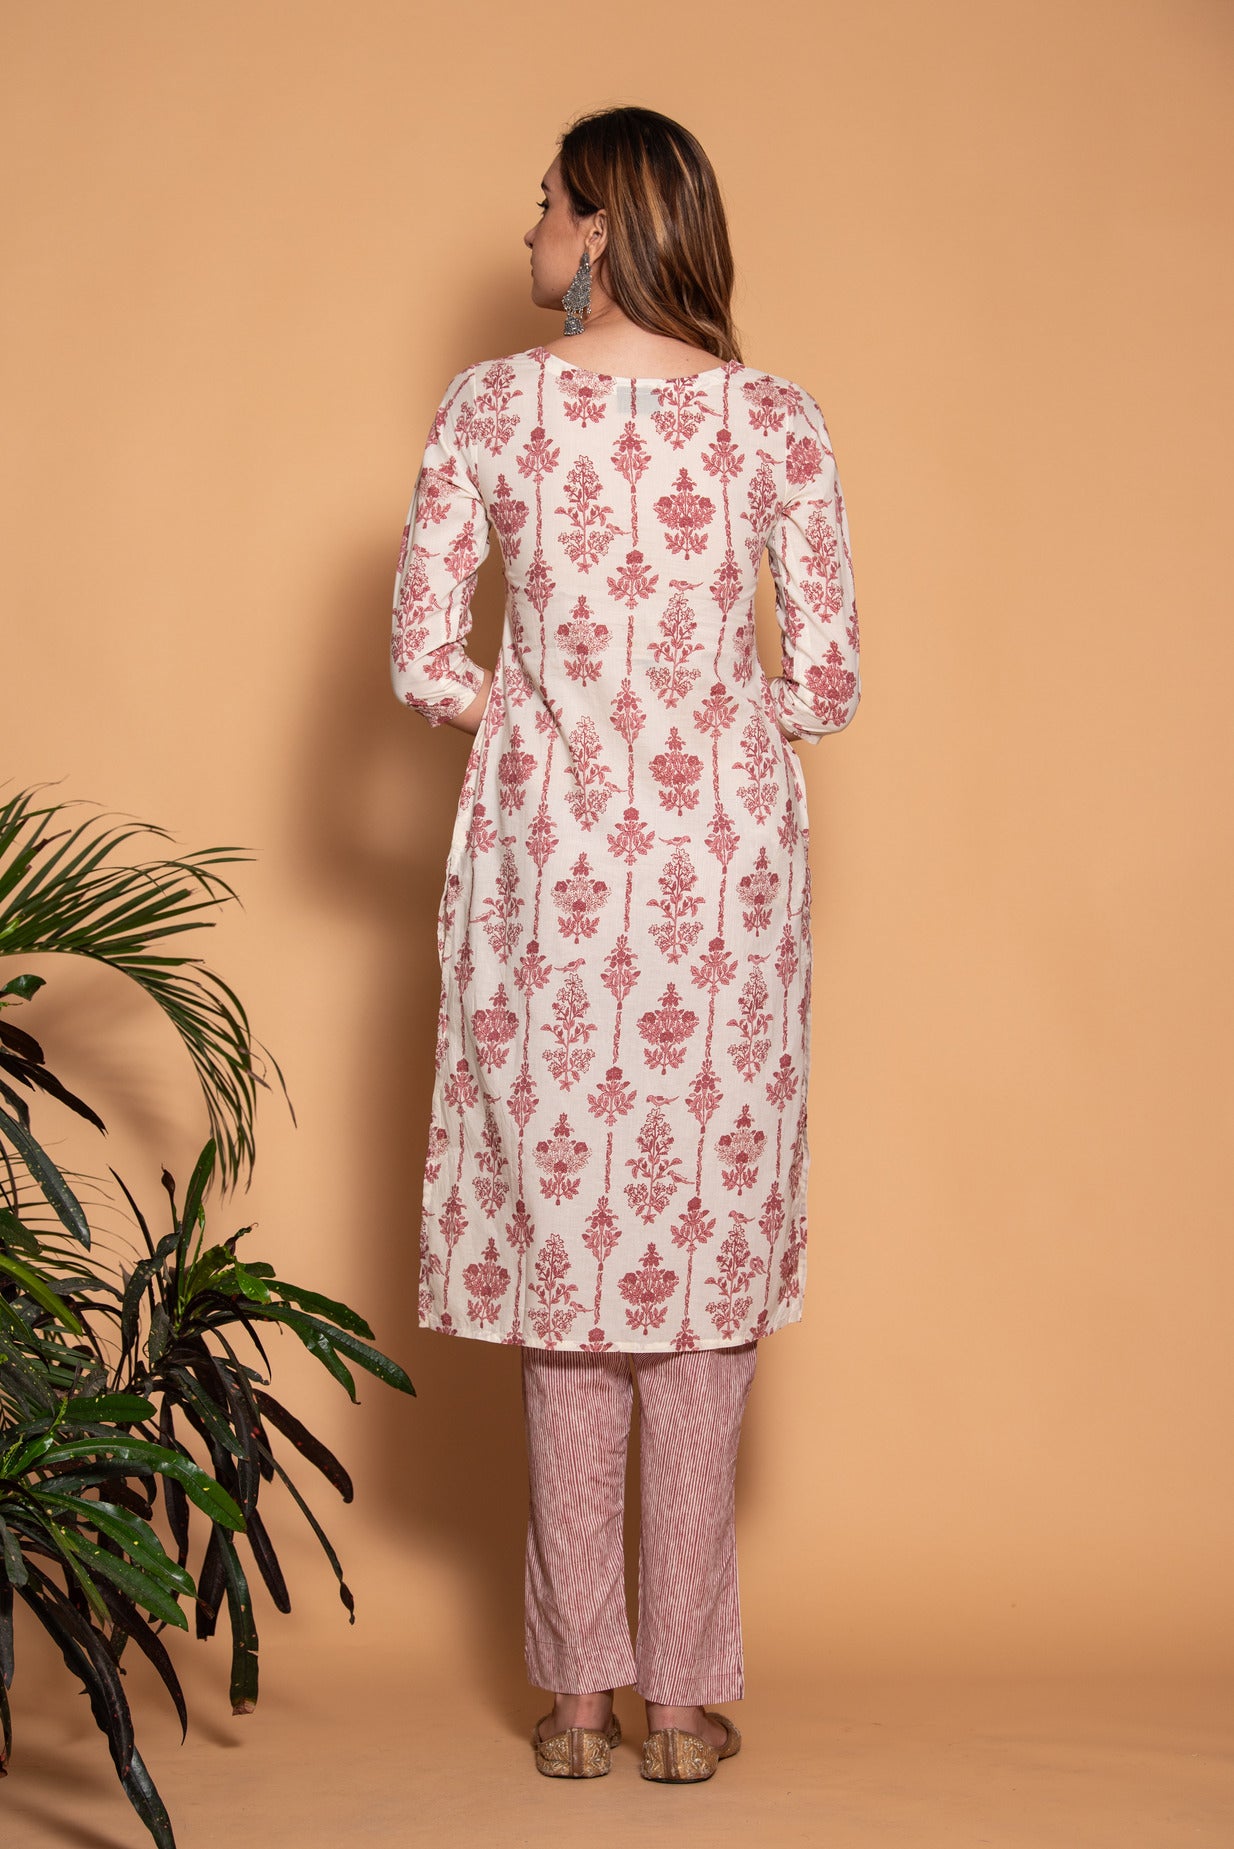 Off-White with Maroon Floral Printed Cotton Kurti Set